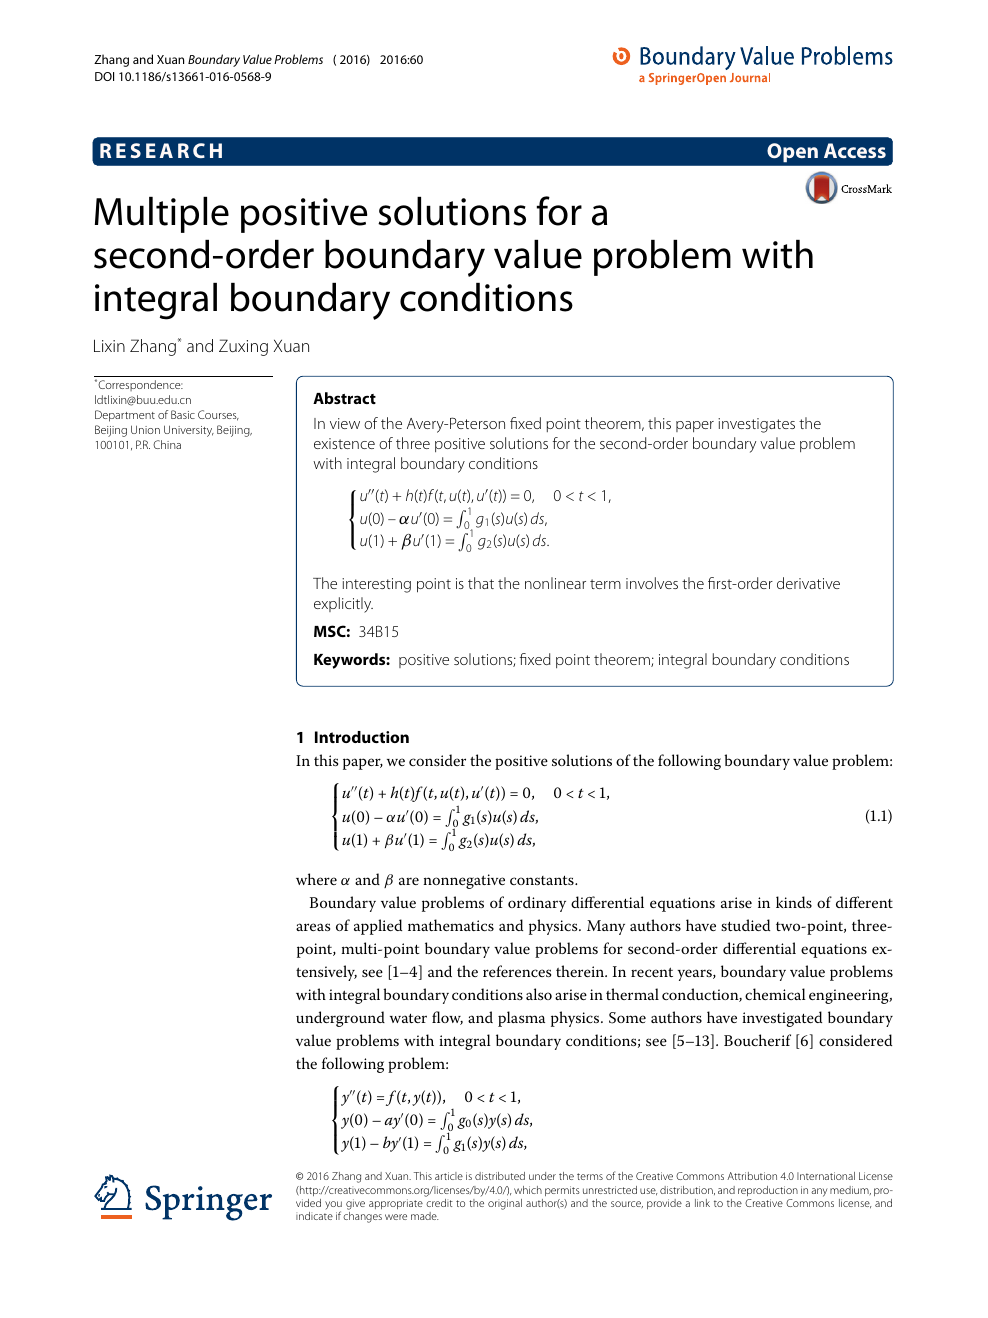 Multiple Positive Solutions For A Second Order Boundary Value Problem With Integral Boundary Conditions Topic Of Research Paper In Mathematics Download Scholarly Article Pdf And Read For Free On Cyberleninka Open Science